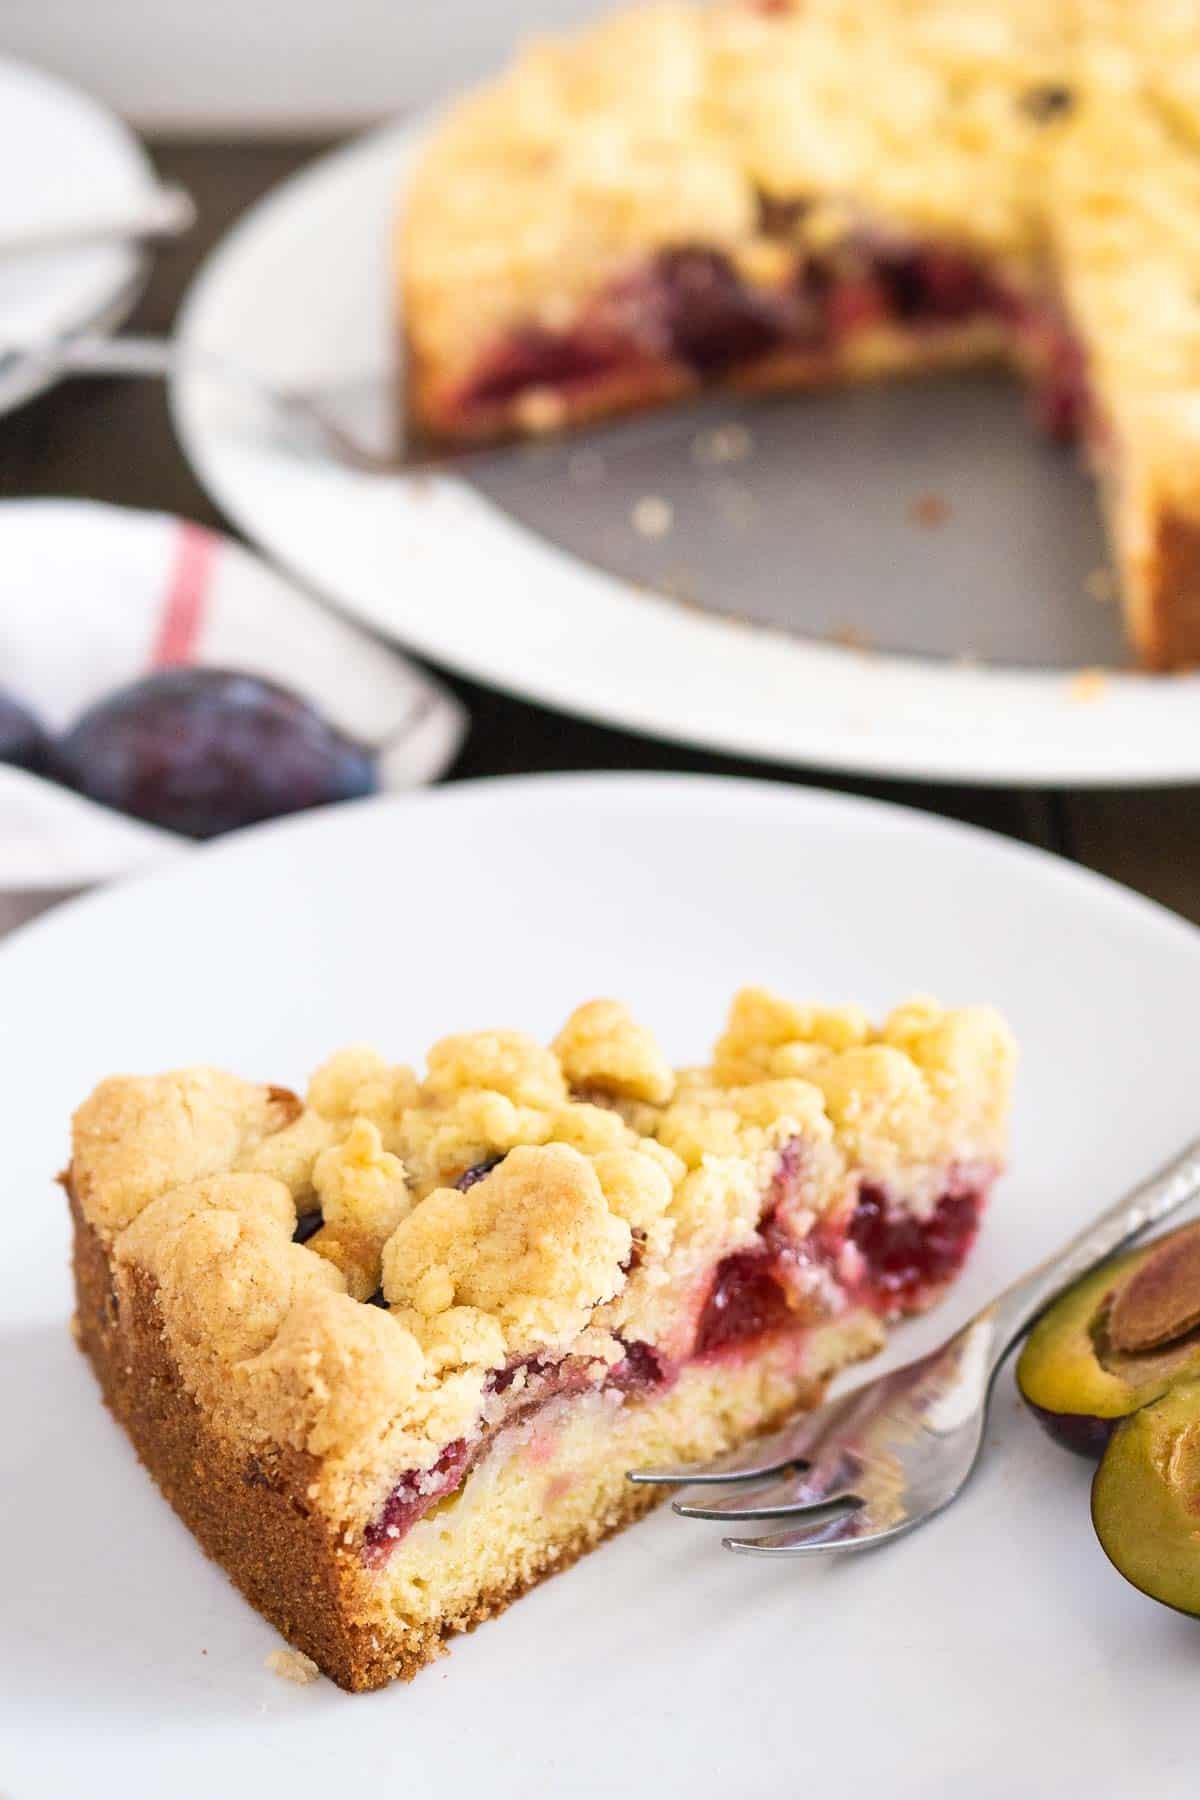 A slice of plum cake topped with streusel on a white plate with a fork and a halved plum. The whole cake is in the background.